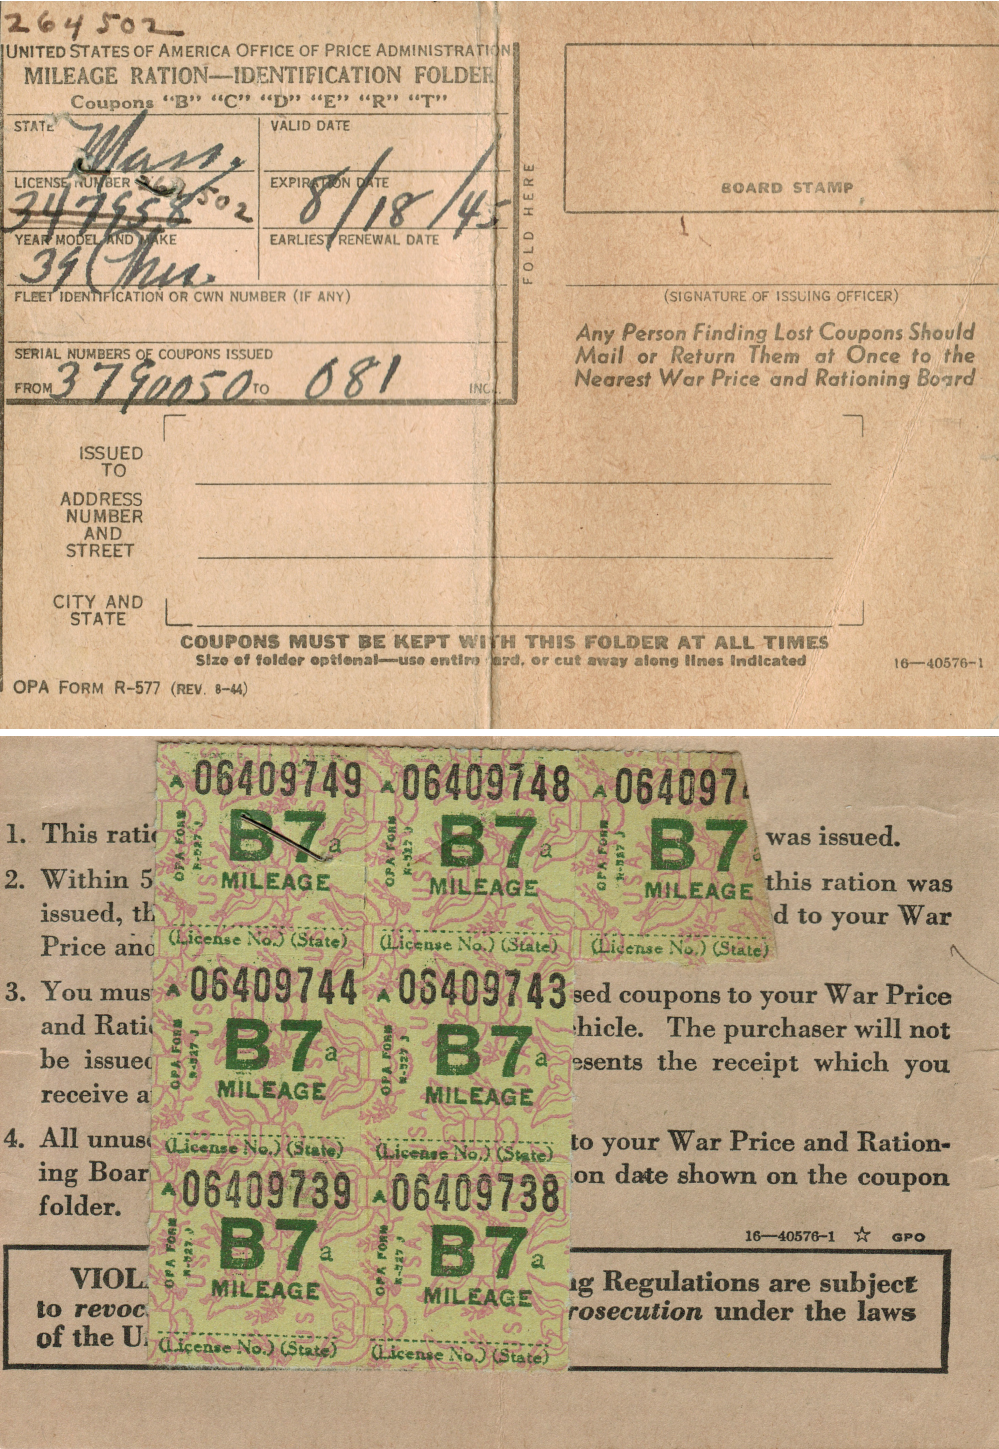 B Ration Coupon booklet and stamps for Robert Strong Woodward's 1939 Chevrolet Woody Beachwagon